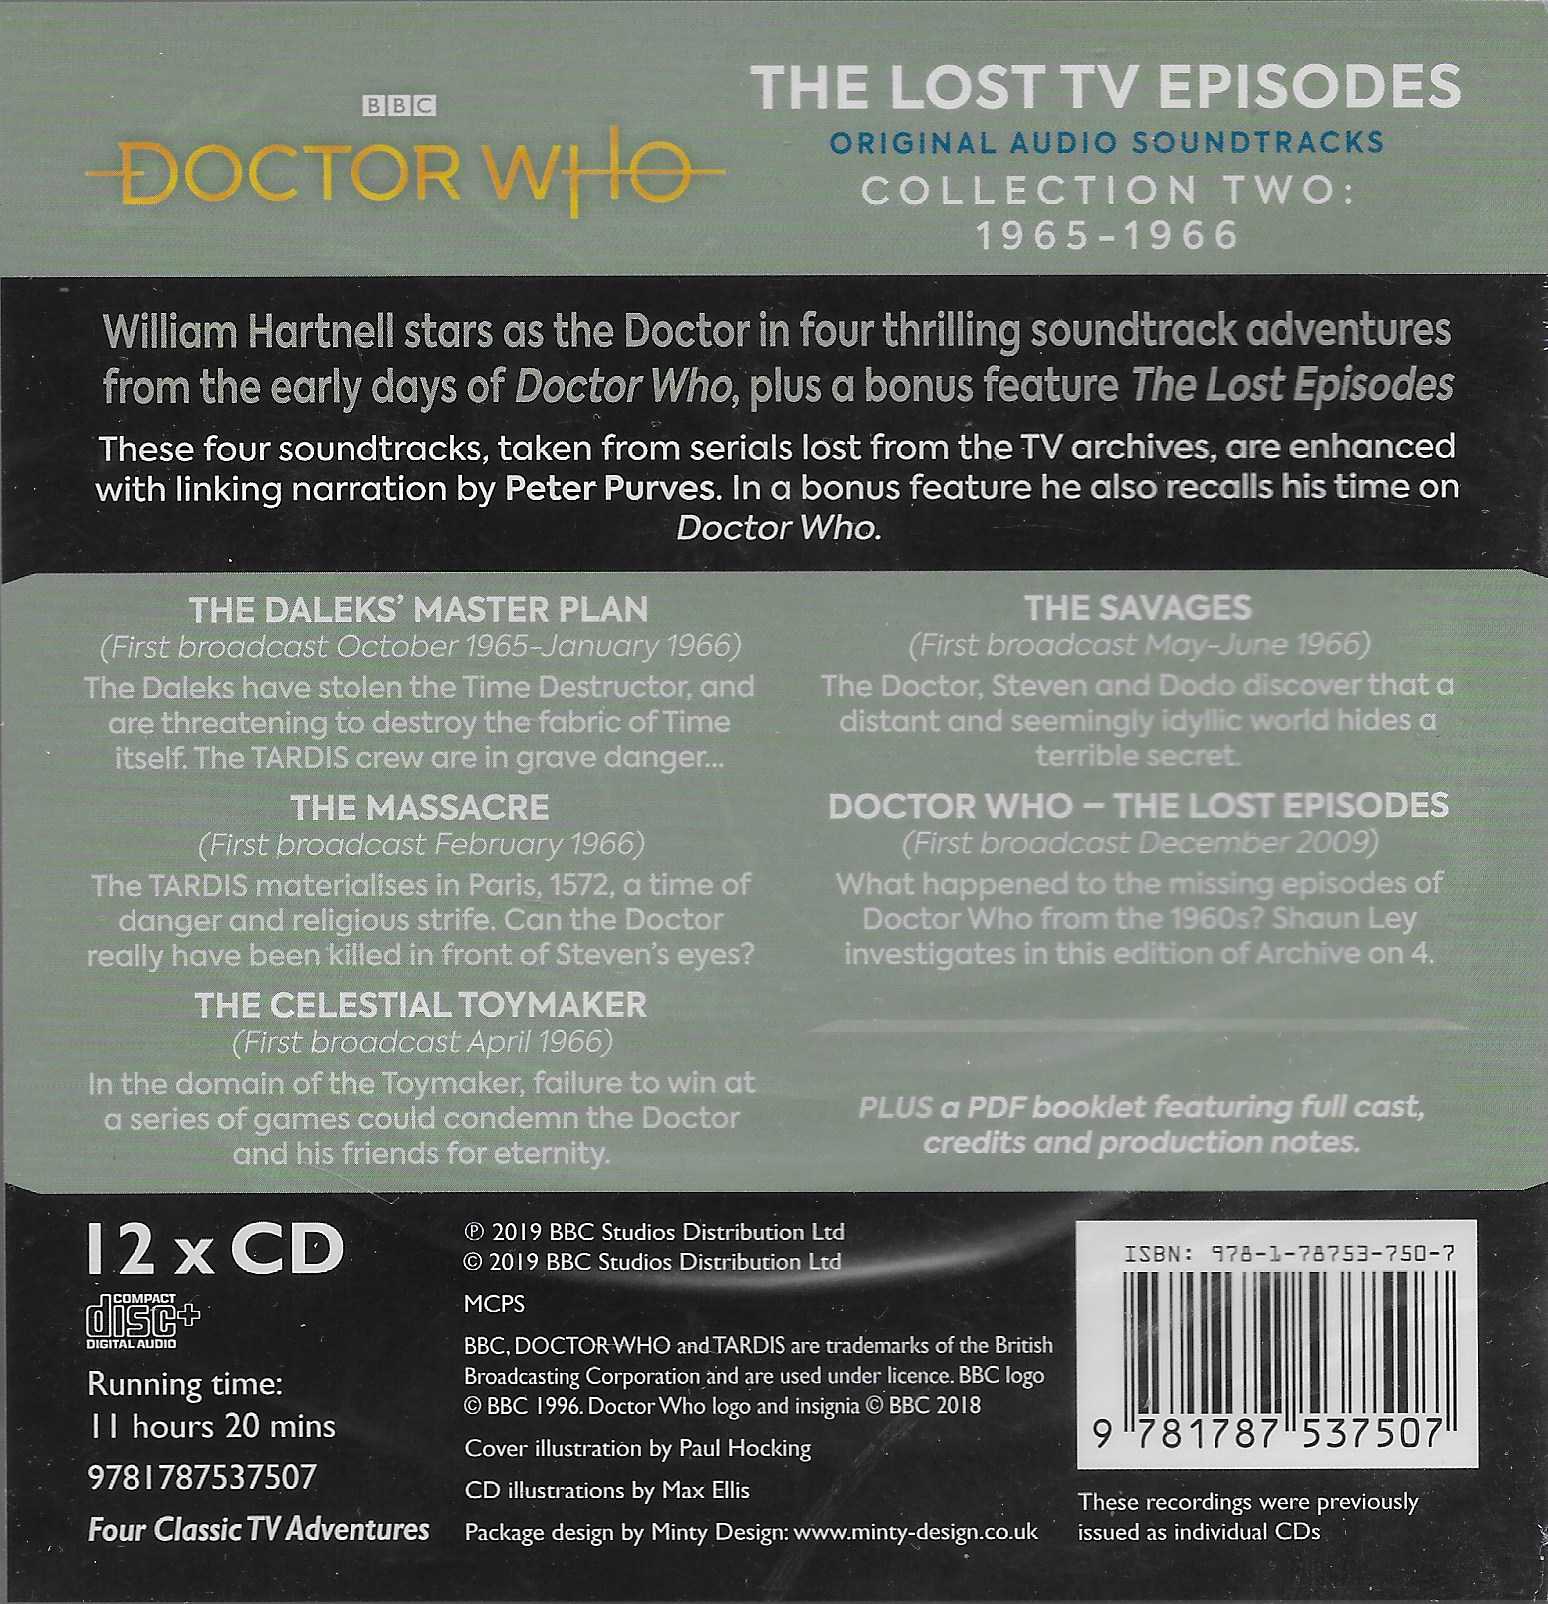 Picture of ISBN 978-1-78753-750-7 Doctor Who - The lost TV episodes - Collection two: 1965-1966 by artist Various from the BBC records and Tapes library